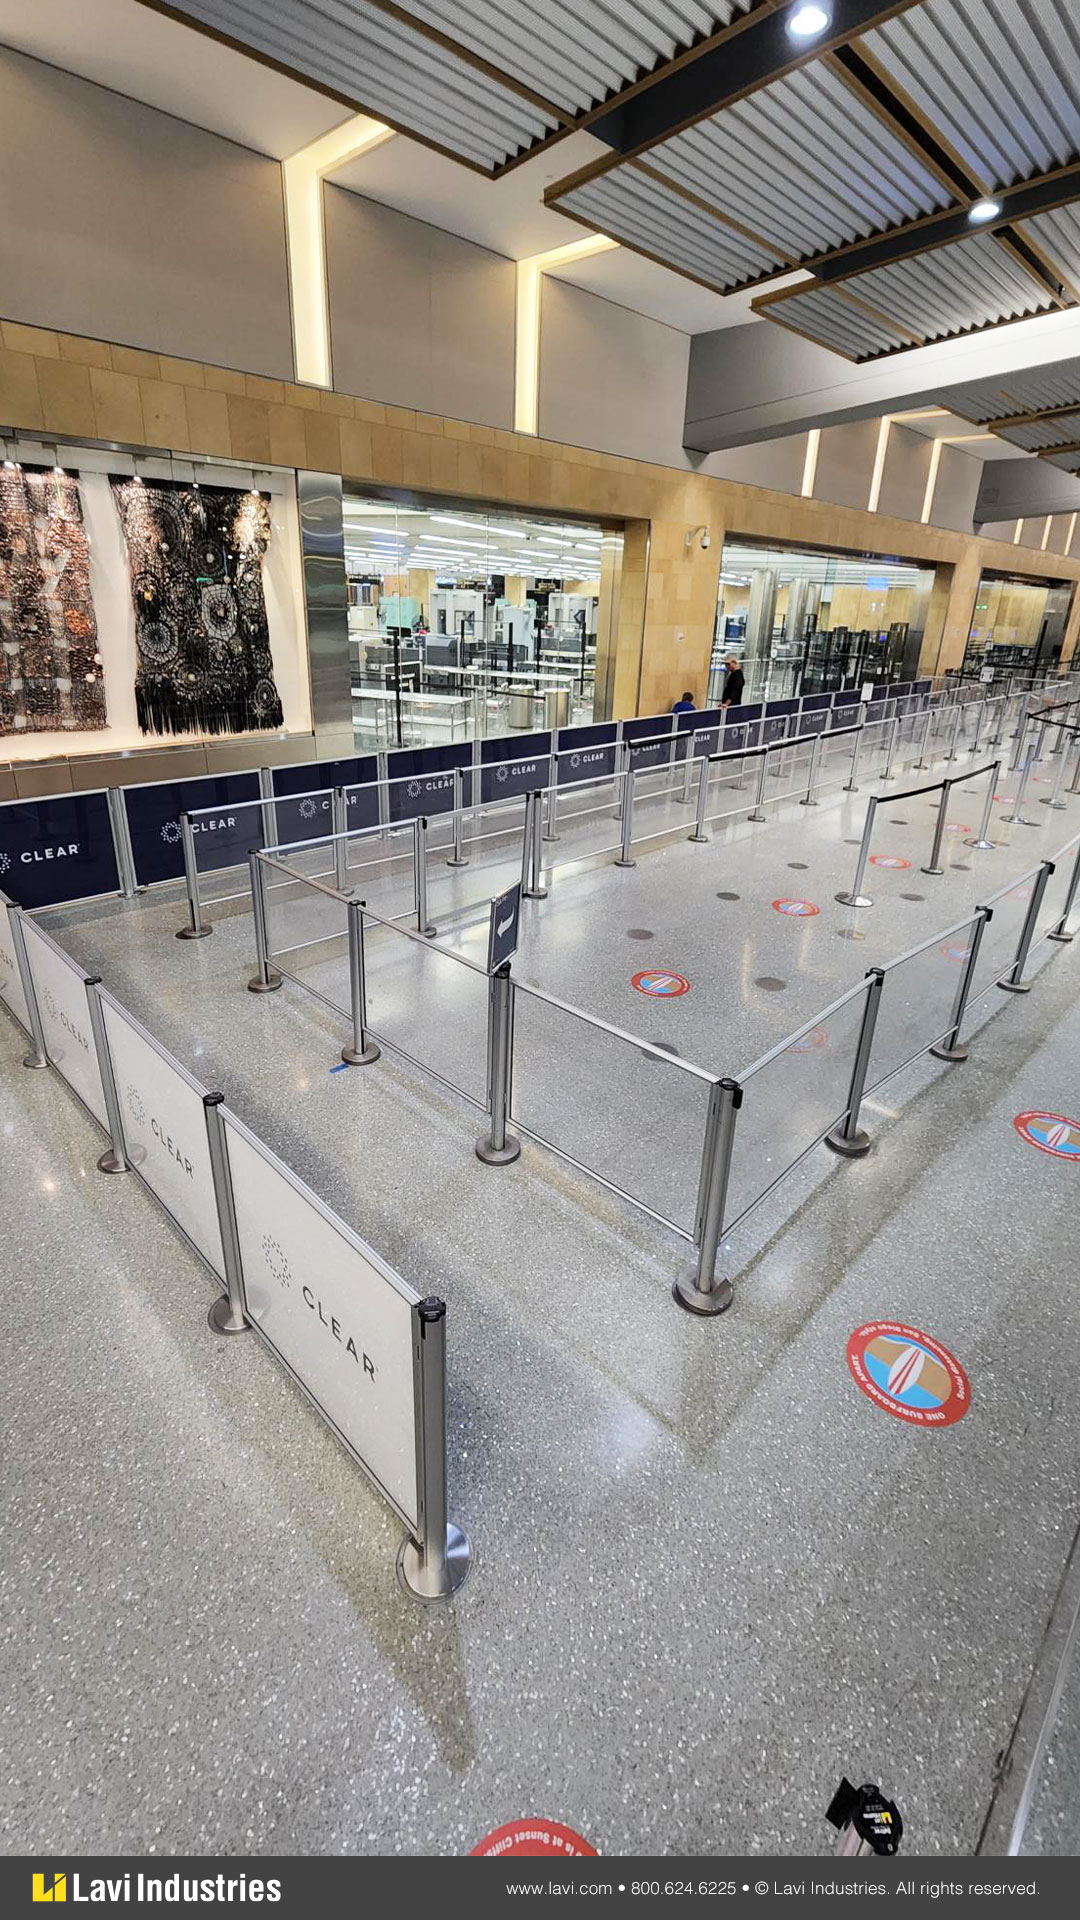 Airport,Queuing,SocialDistancing,Barriers,MagneticBase,Stanchions,Banners